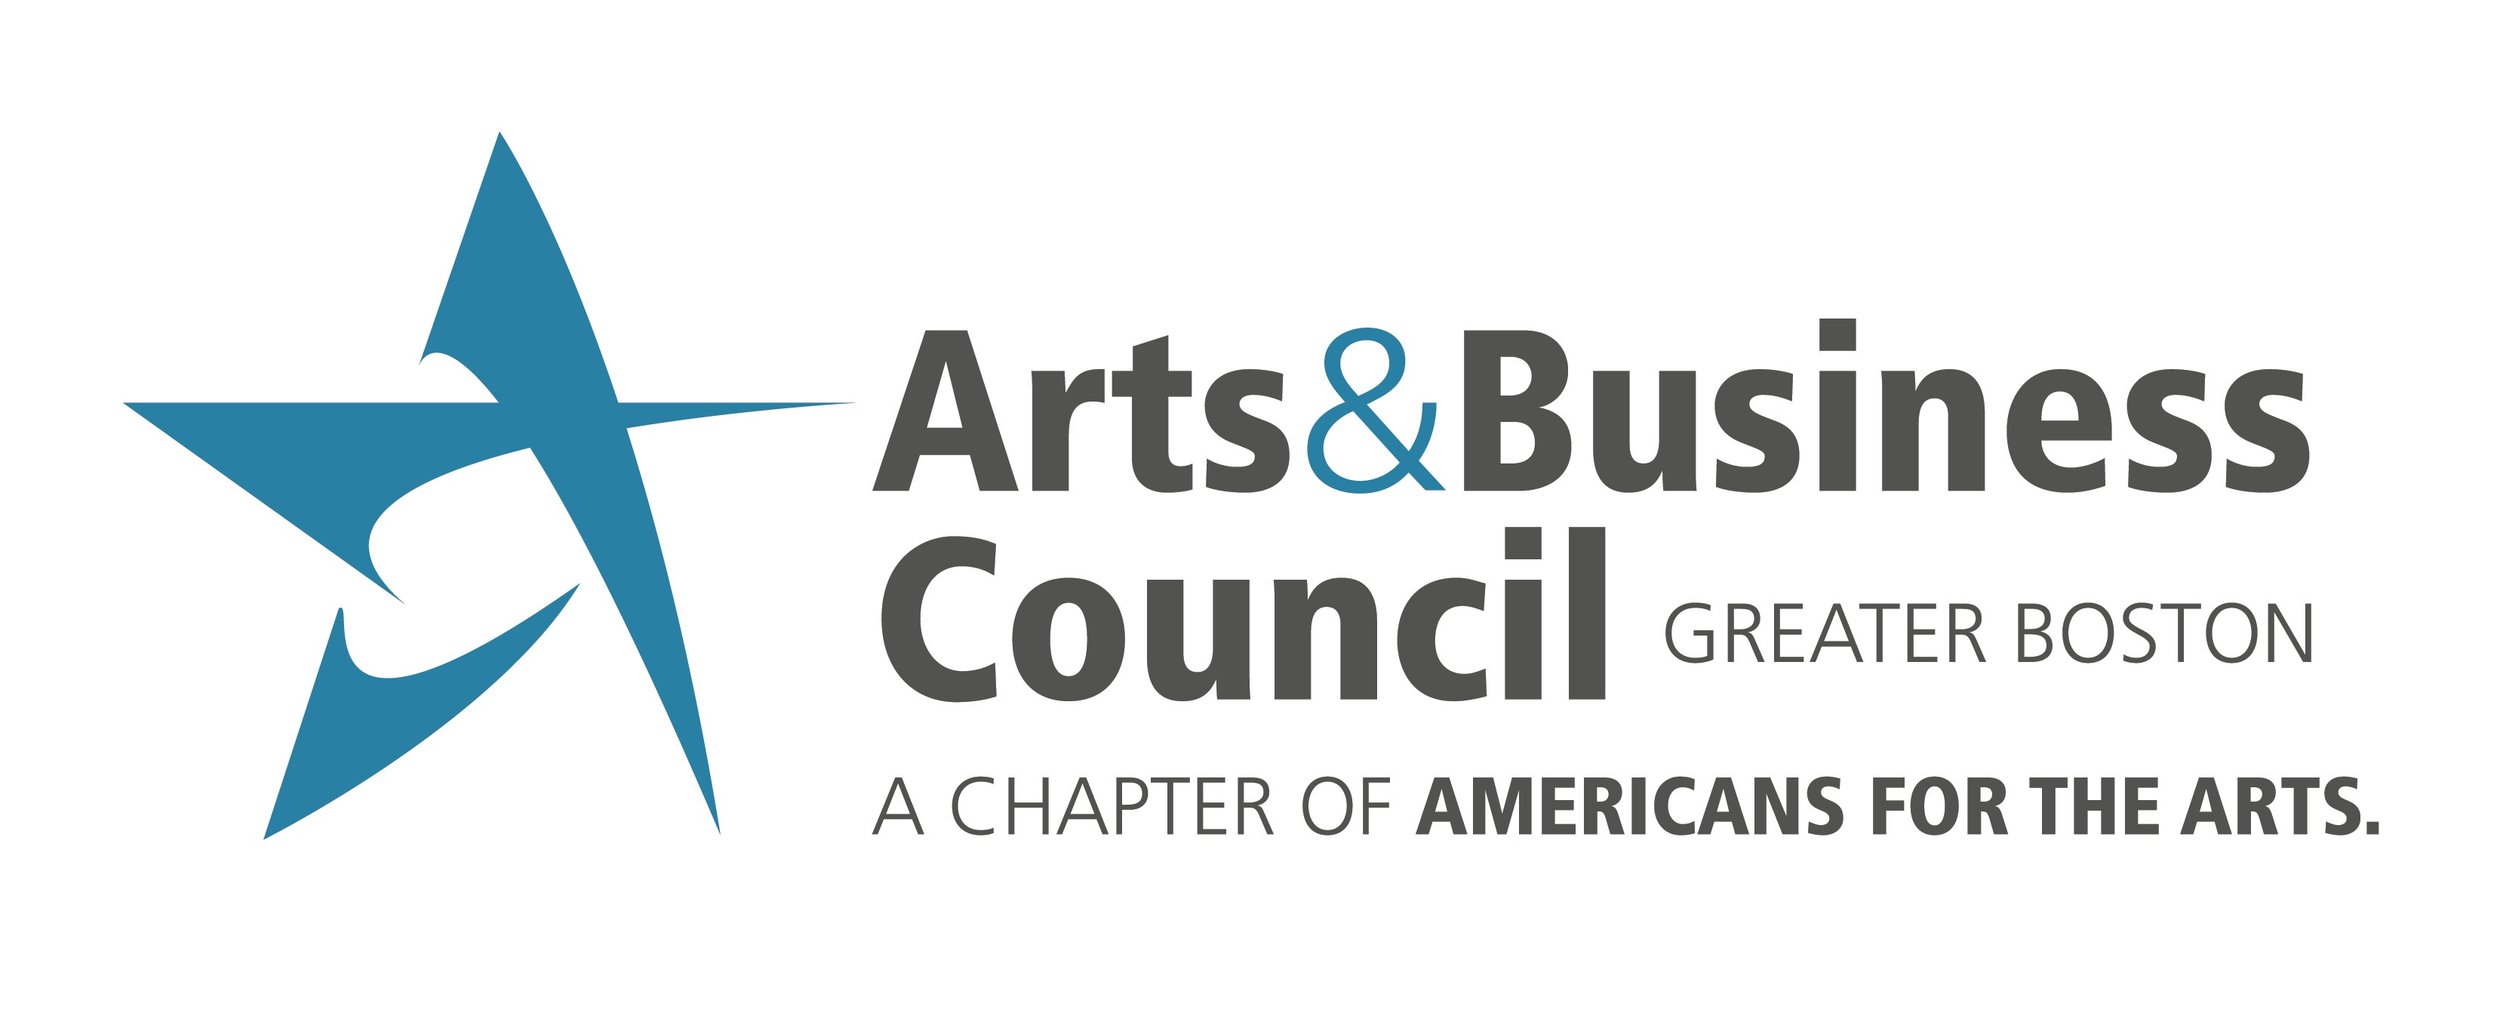 Art & Business Council of Greater Boston.jpg